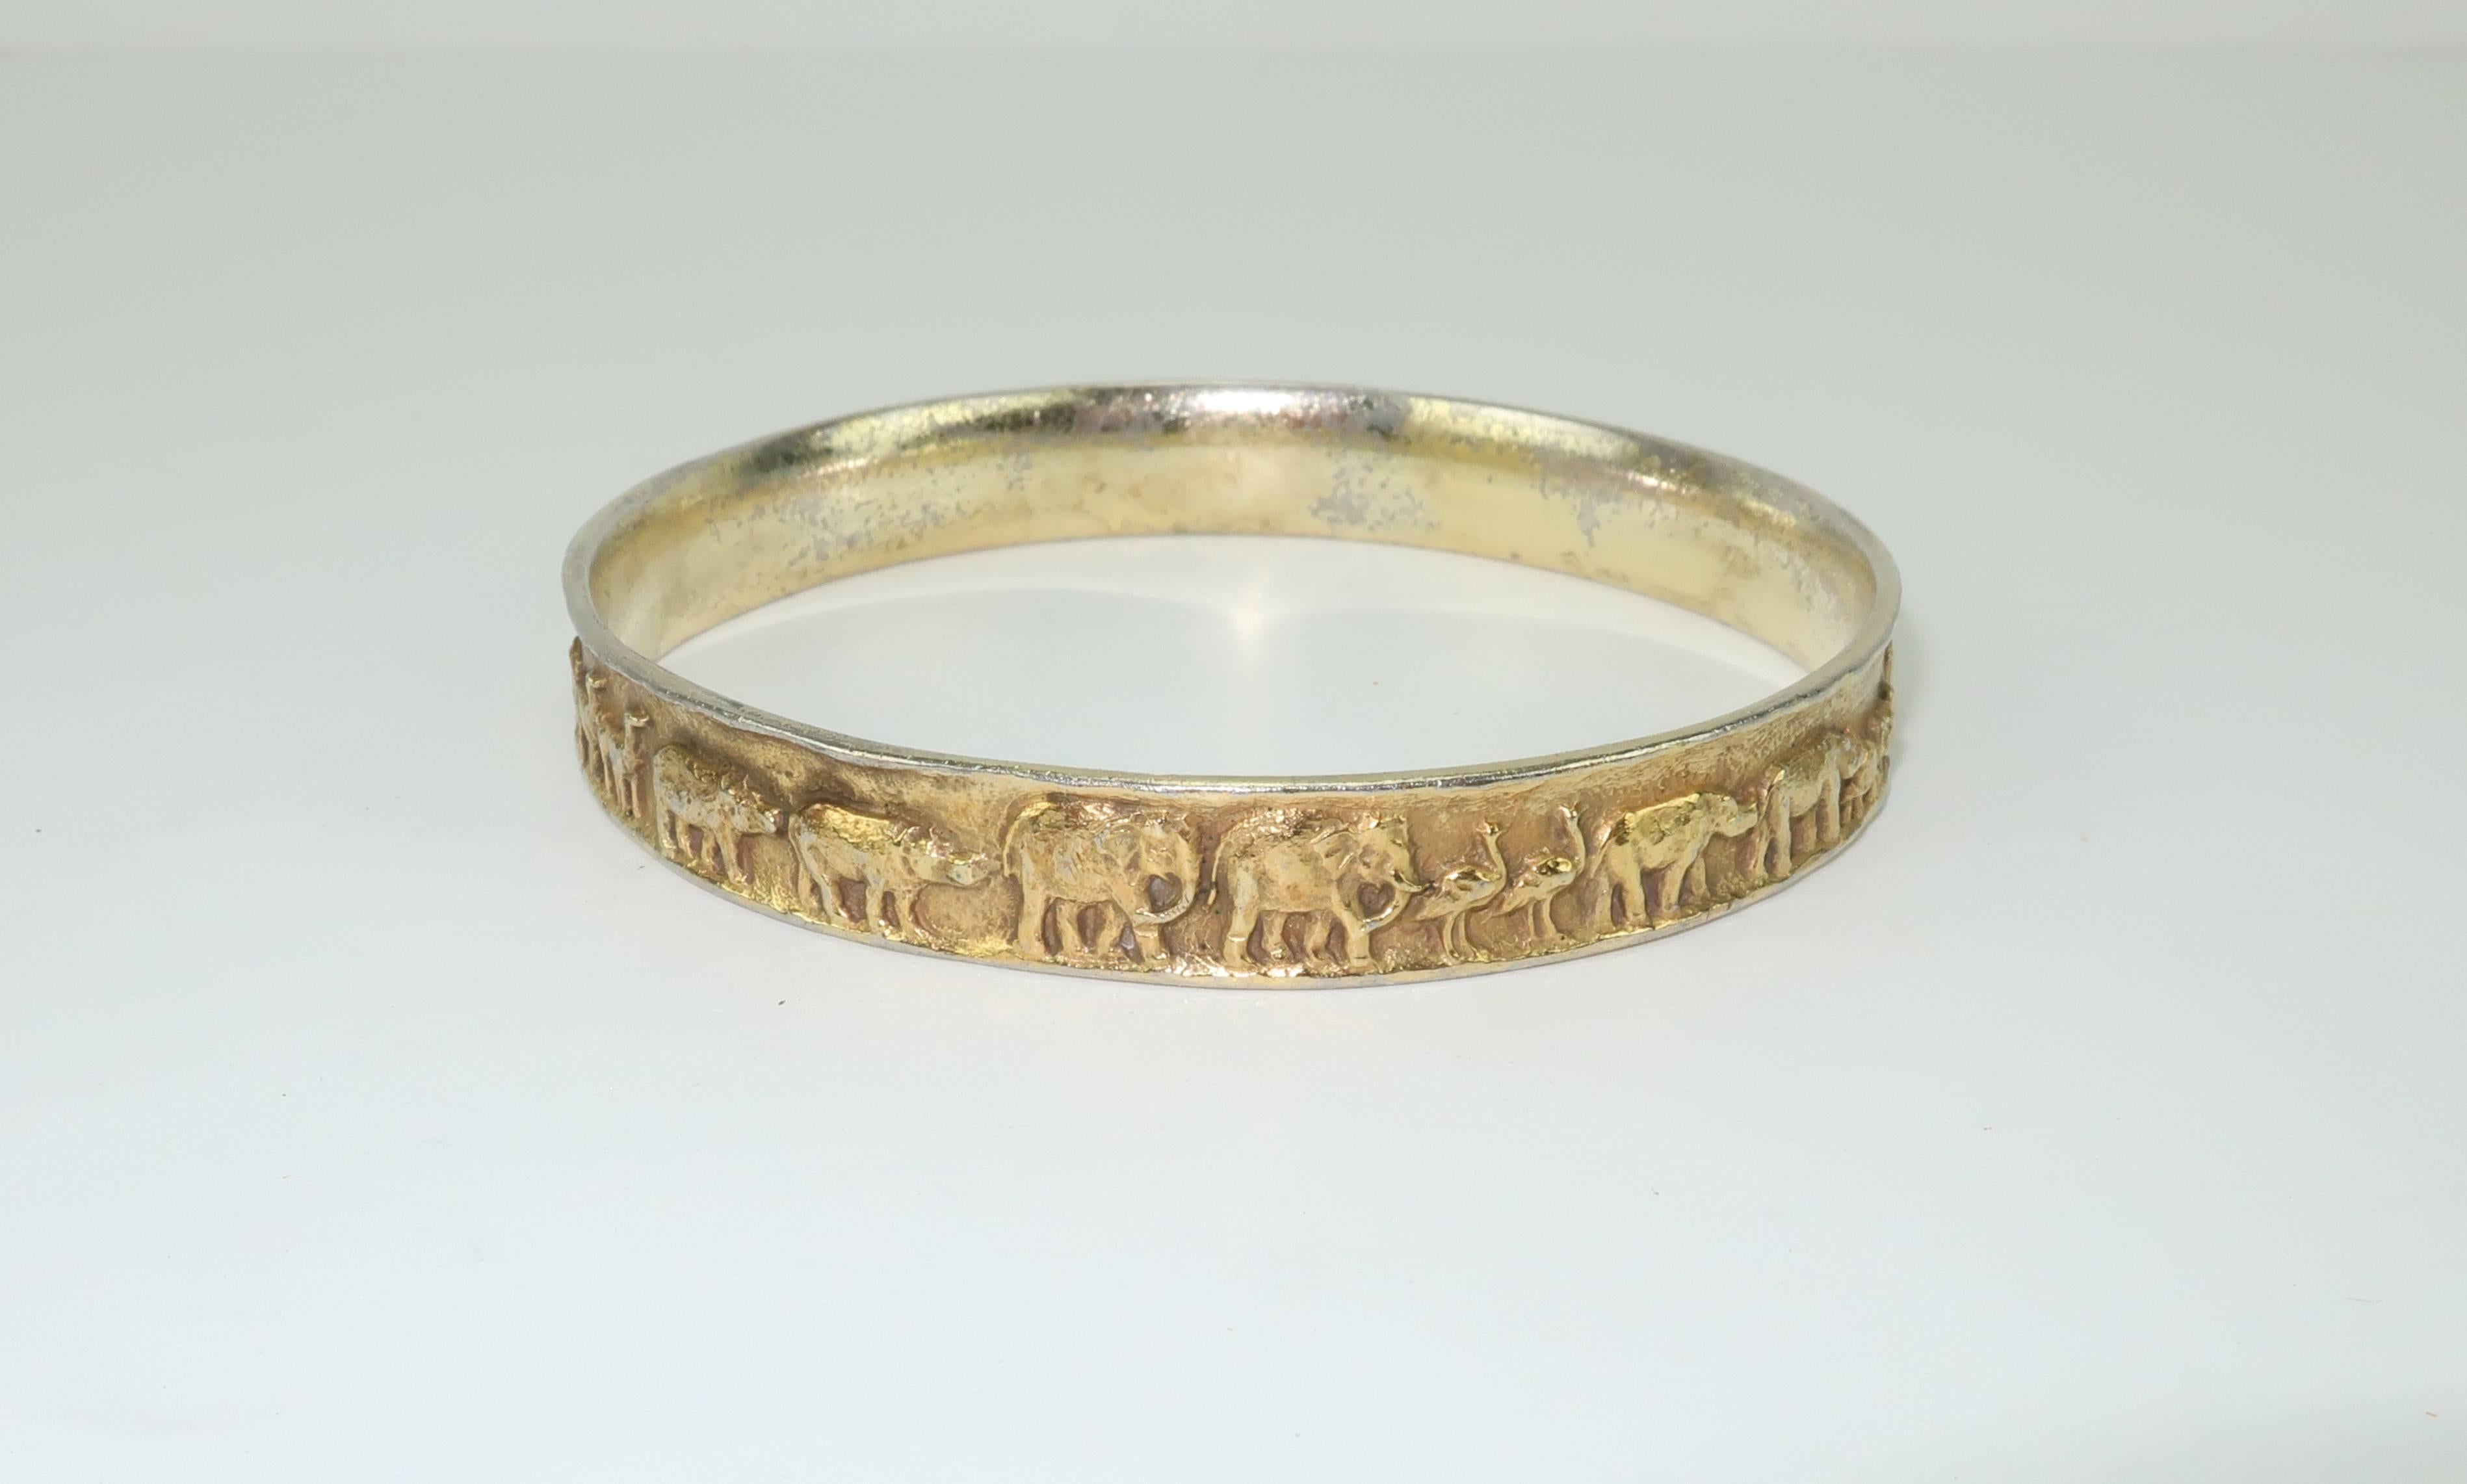 It is a parade of twosies around this sterling silver vermeil bangle bracelet from James Avery of Texas.  A family owned workshop of artisans, James Avery has been designing jewelry since the 1950’s often with religious themes and symbolism and